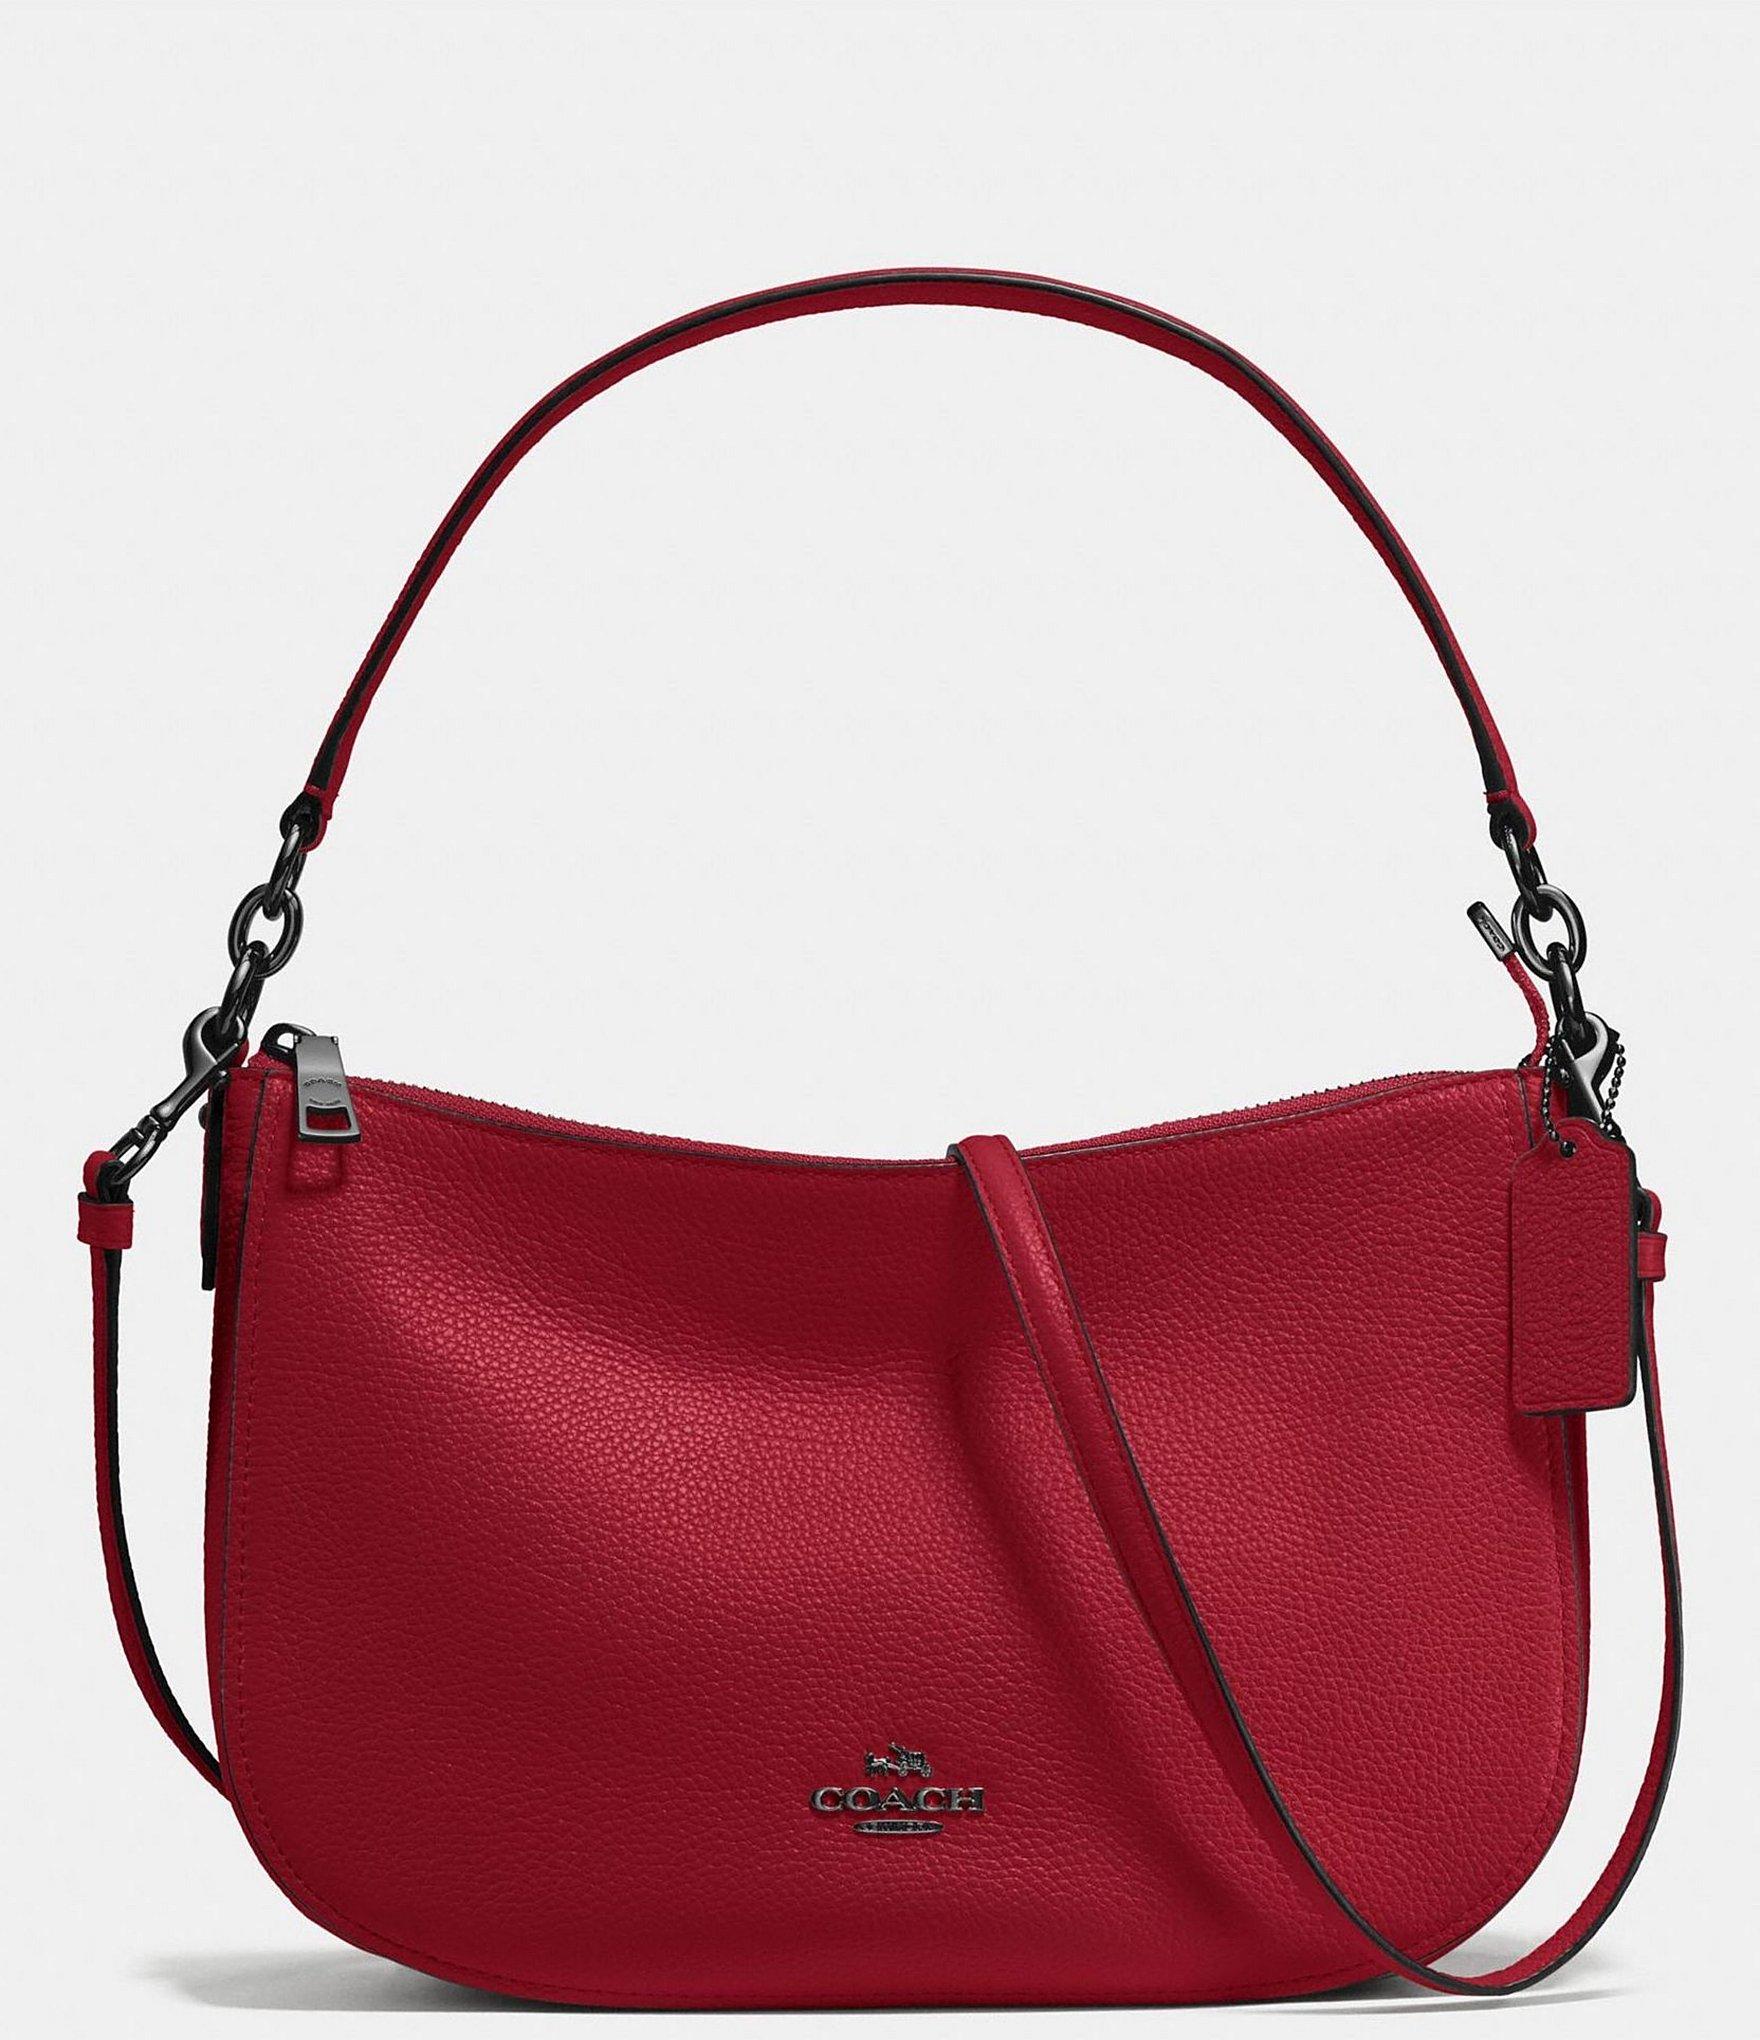 Lyst - Coach Chelsea Crossbody In Pebble Leather in Red